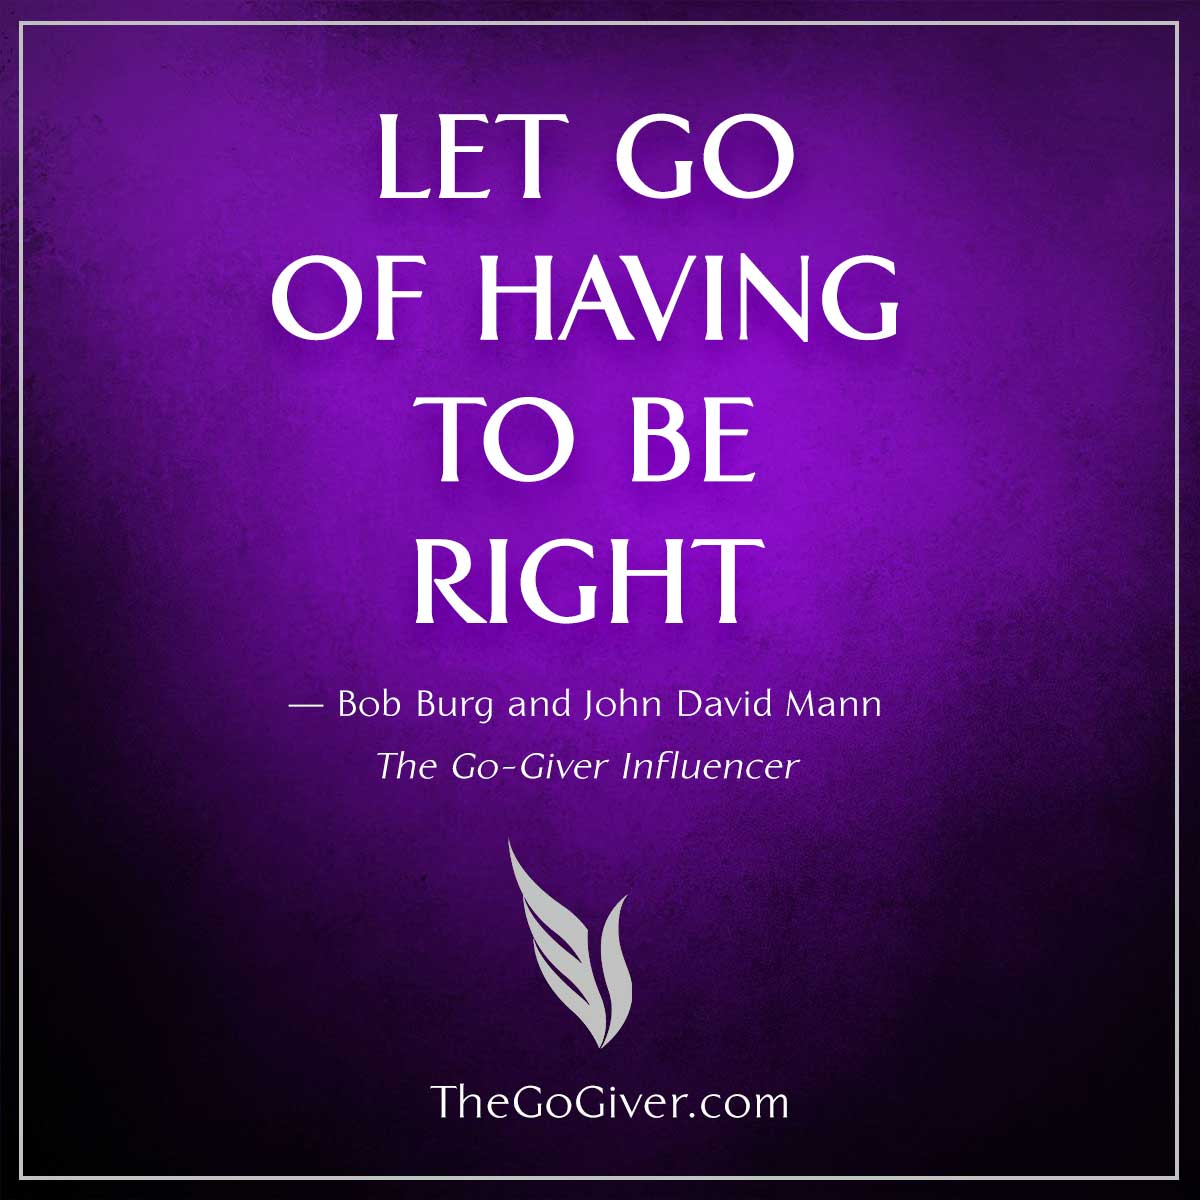 Let Go of Having To Be Right - The Go-Giver Influencer